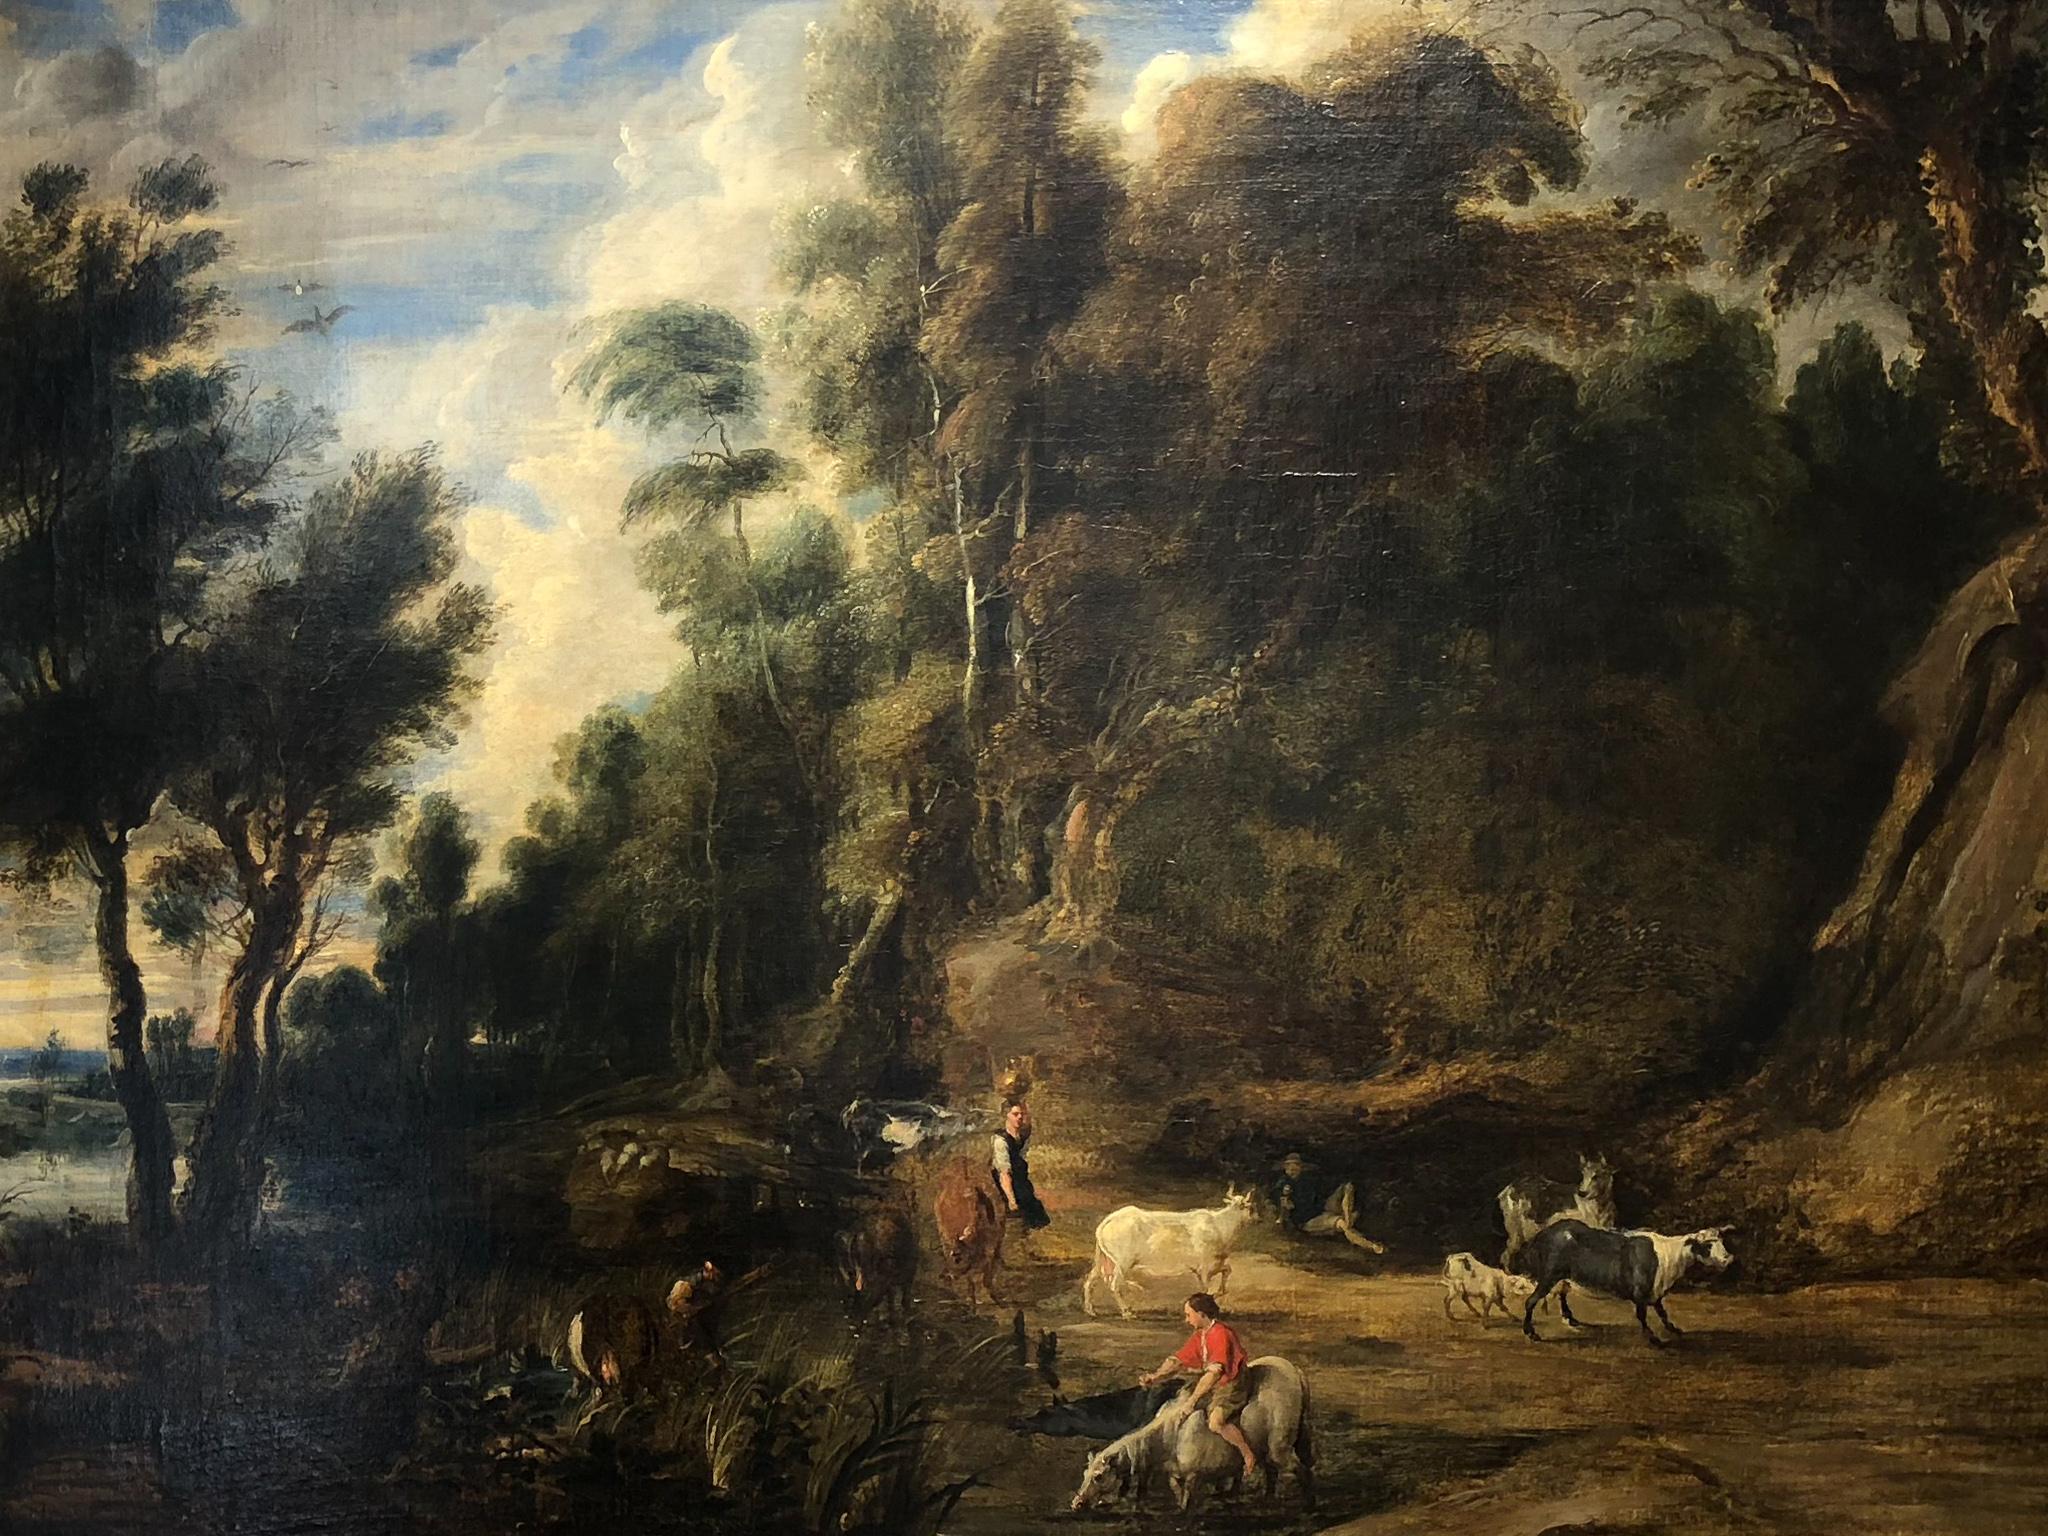 This Baroque Flemish painting represents a landscape along with four figures and different types of animals. It’s a copy of Peter Paul Rubens’ (1577-1640) painting, The Watering Place (1615-22), exhibited in the National Gallery of London. 
The